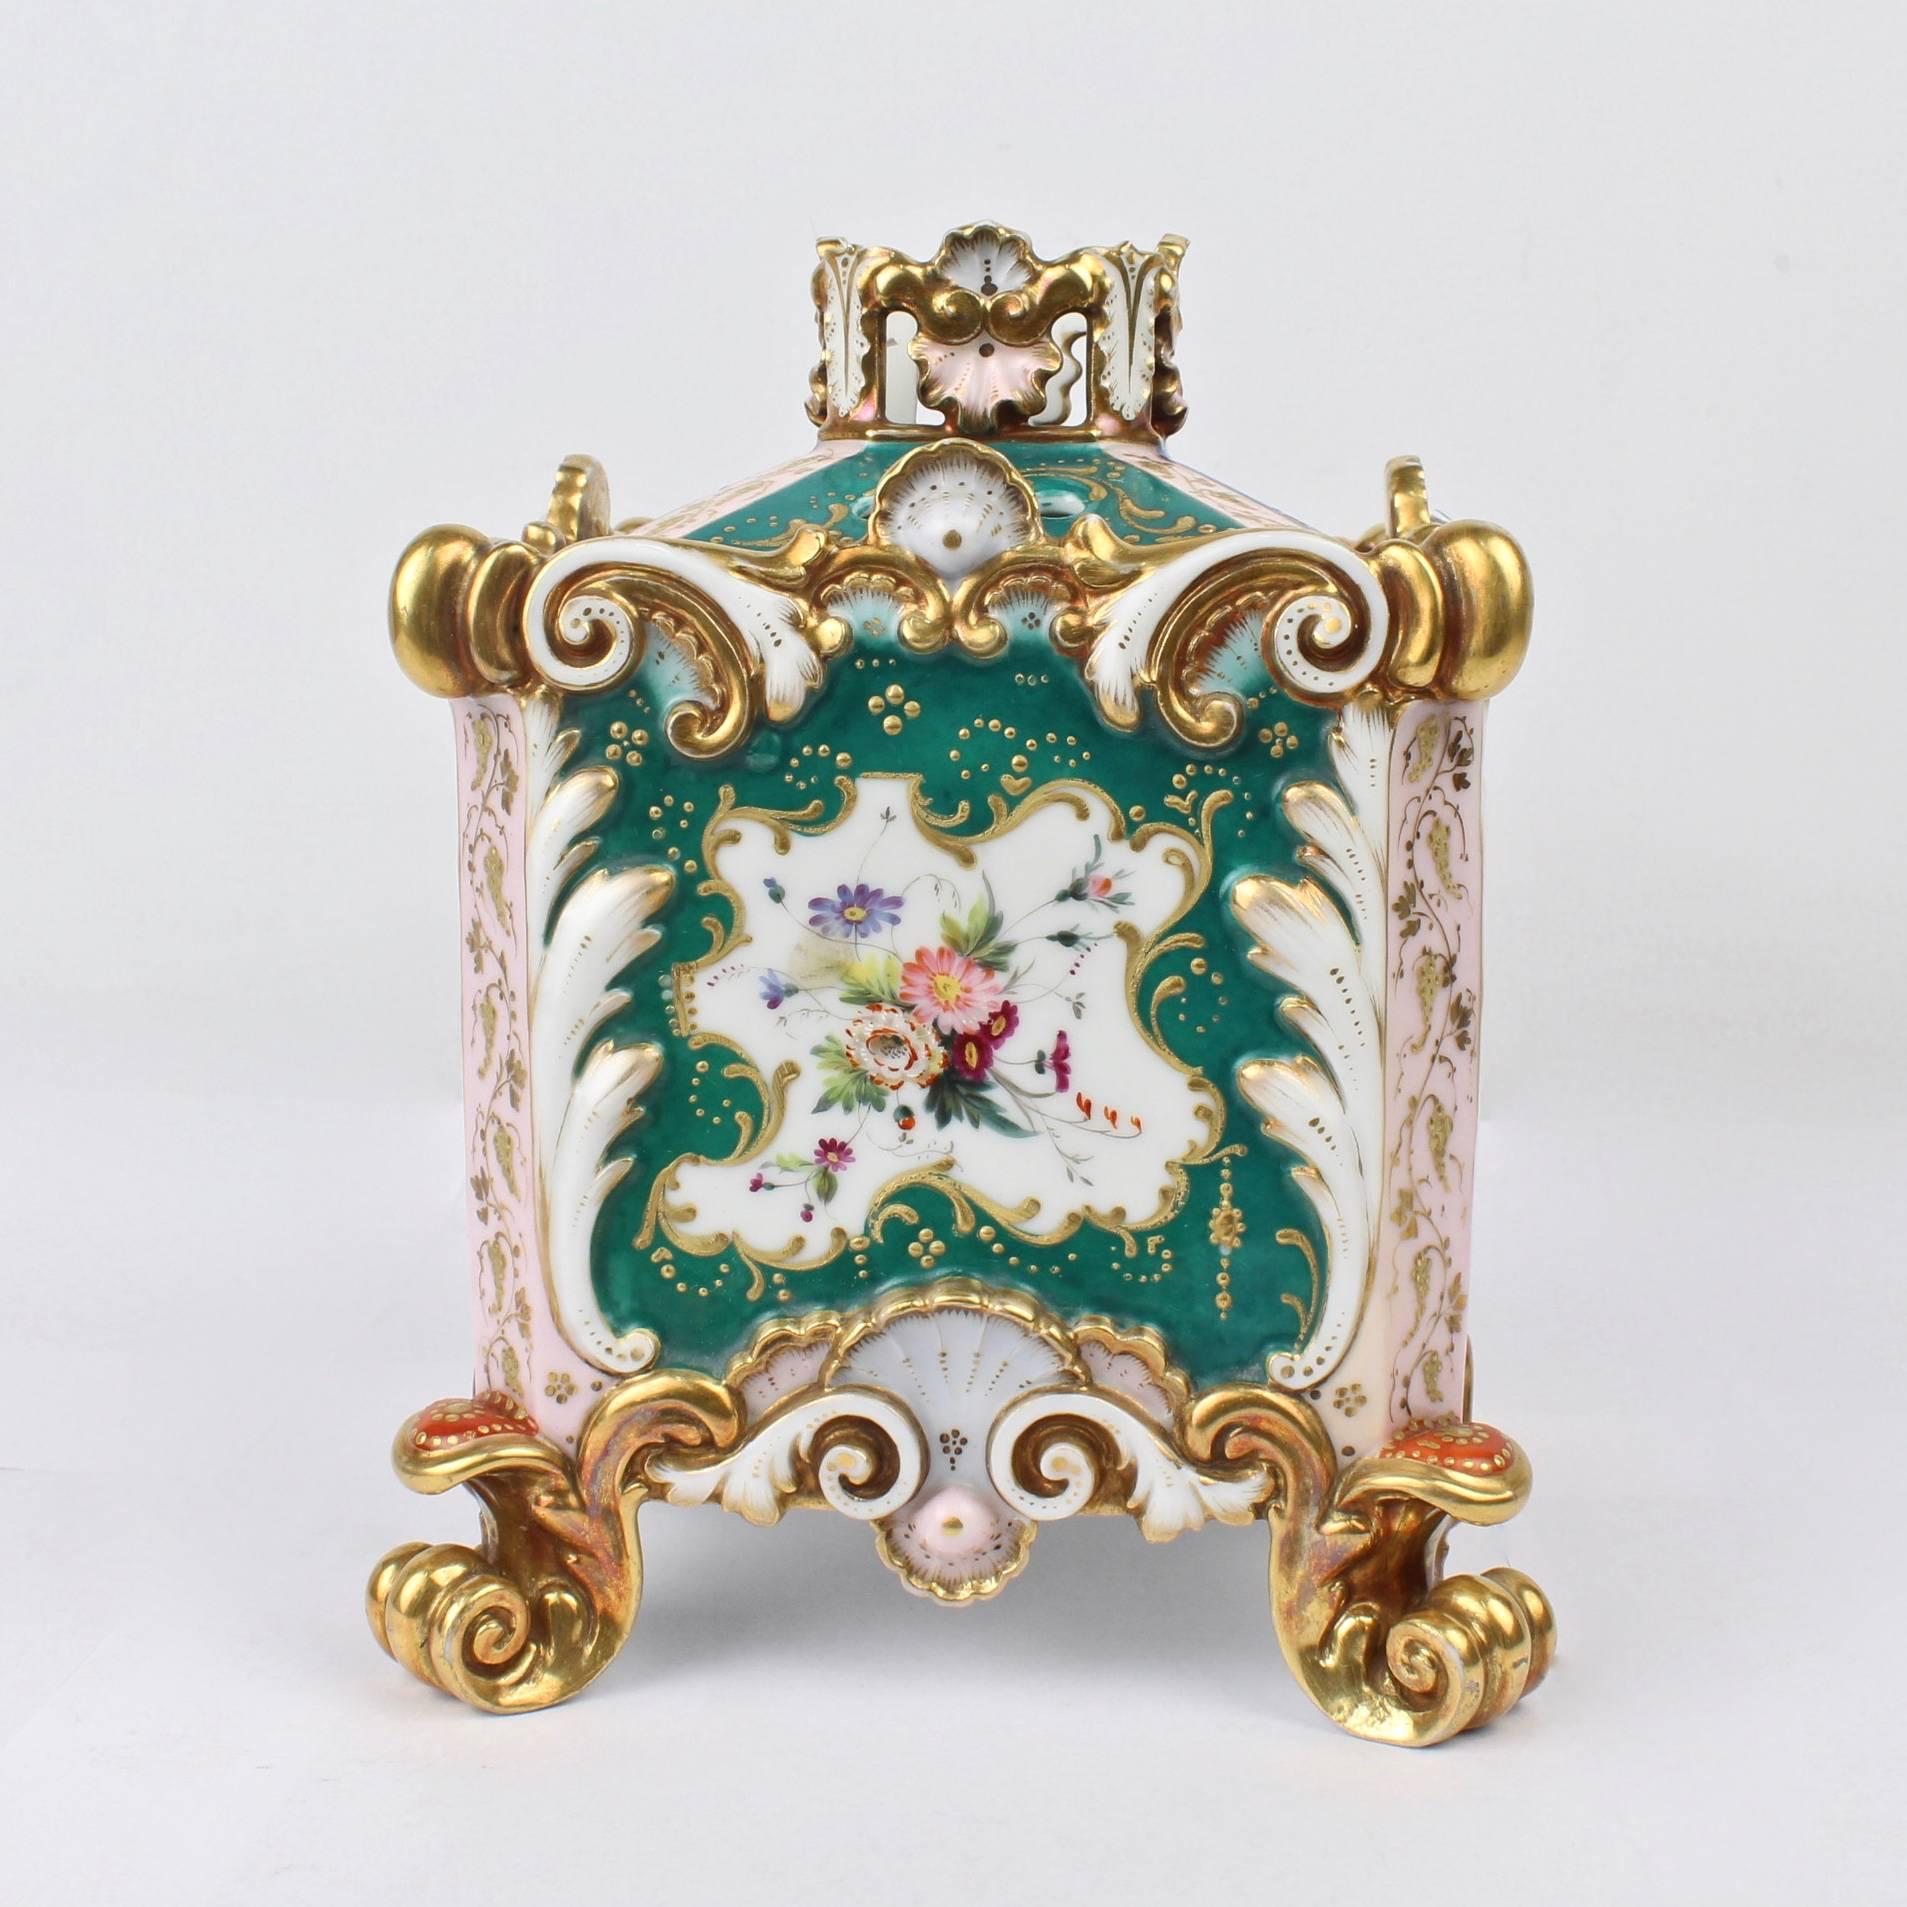 A 19th century Rococo Revival porcelain covered potpourri jar by the acclaimed Old Paris porcelain manufacturer, Jacob Petit. 

Ornately modeled with heavy gilding and decoration in blues, green, salmon and pink. 

The base bears a blue